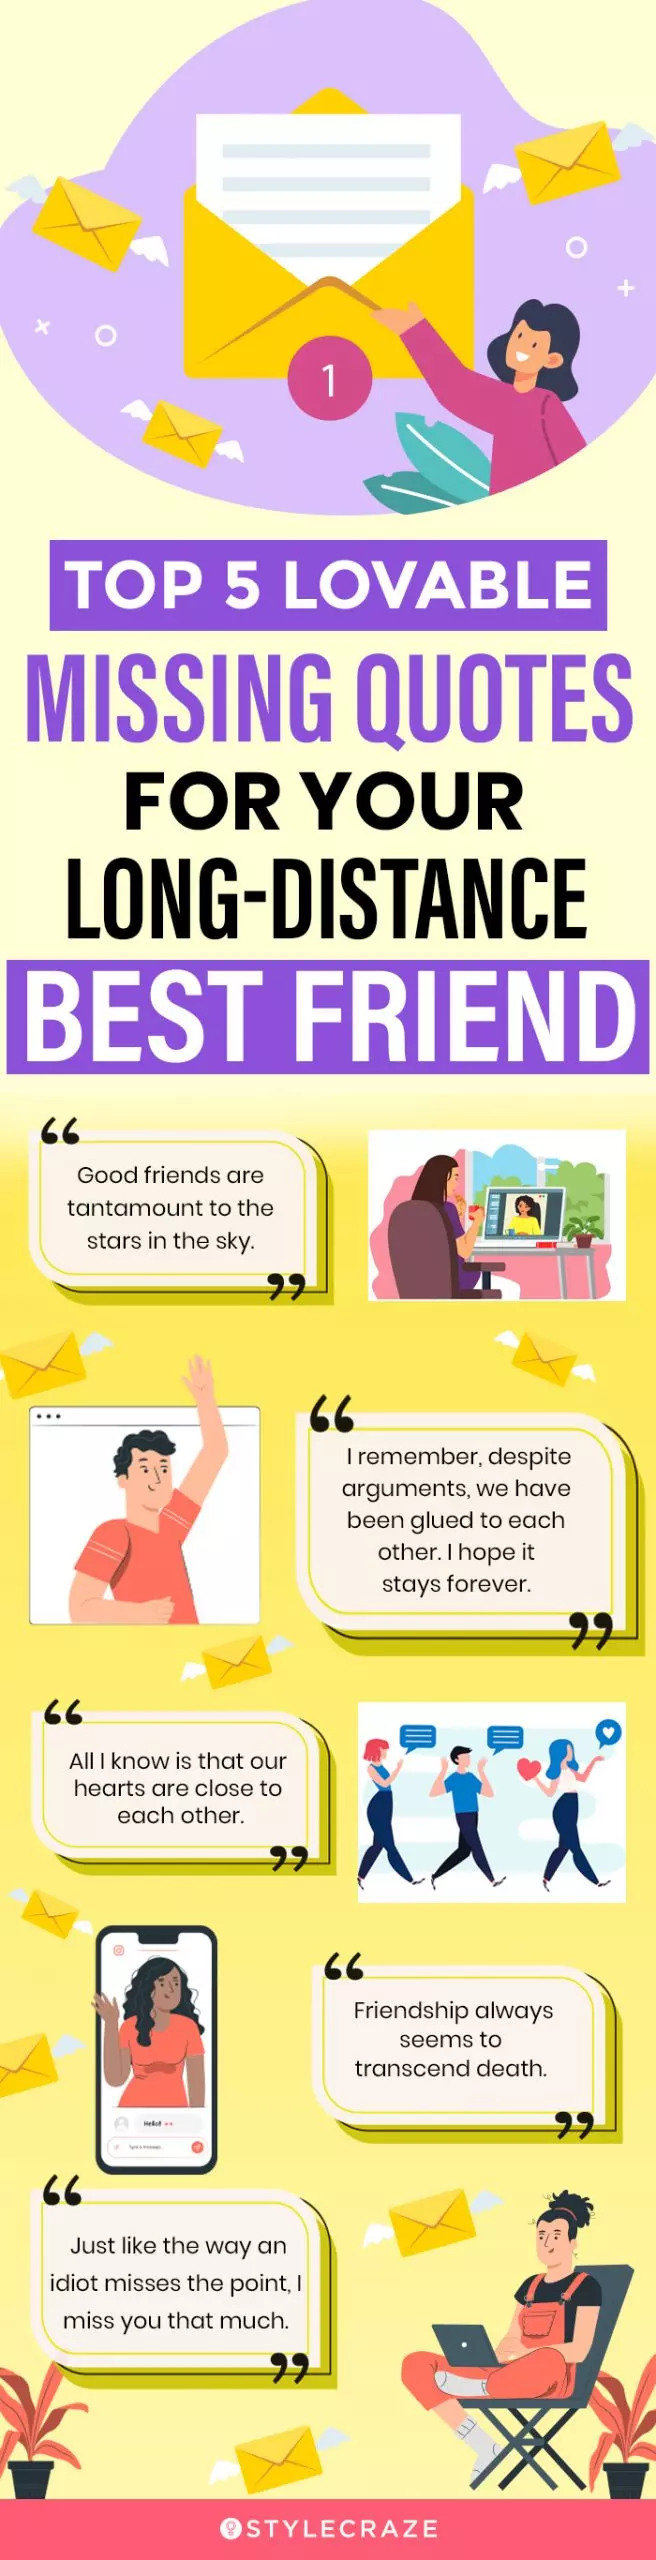 death of a good friend quotes